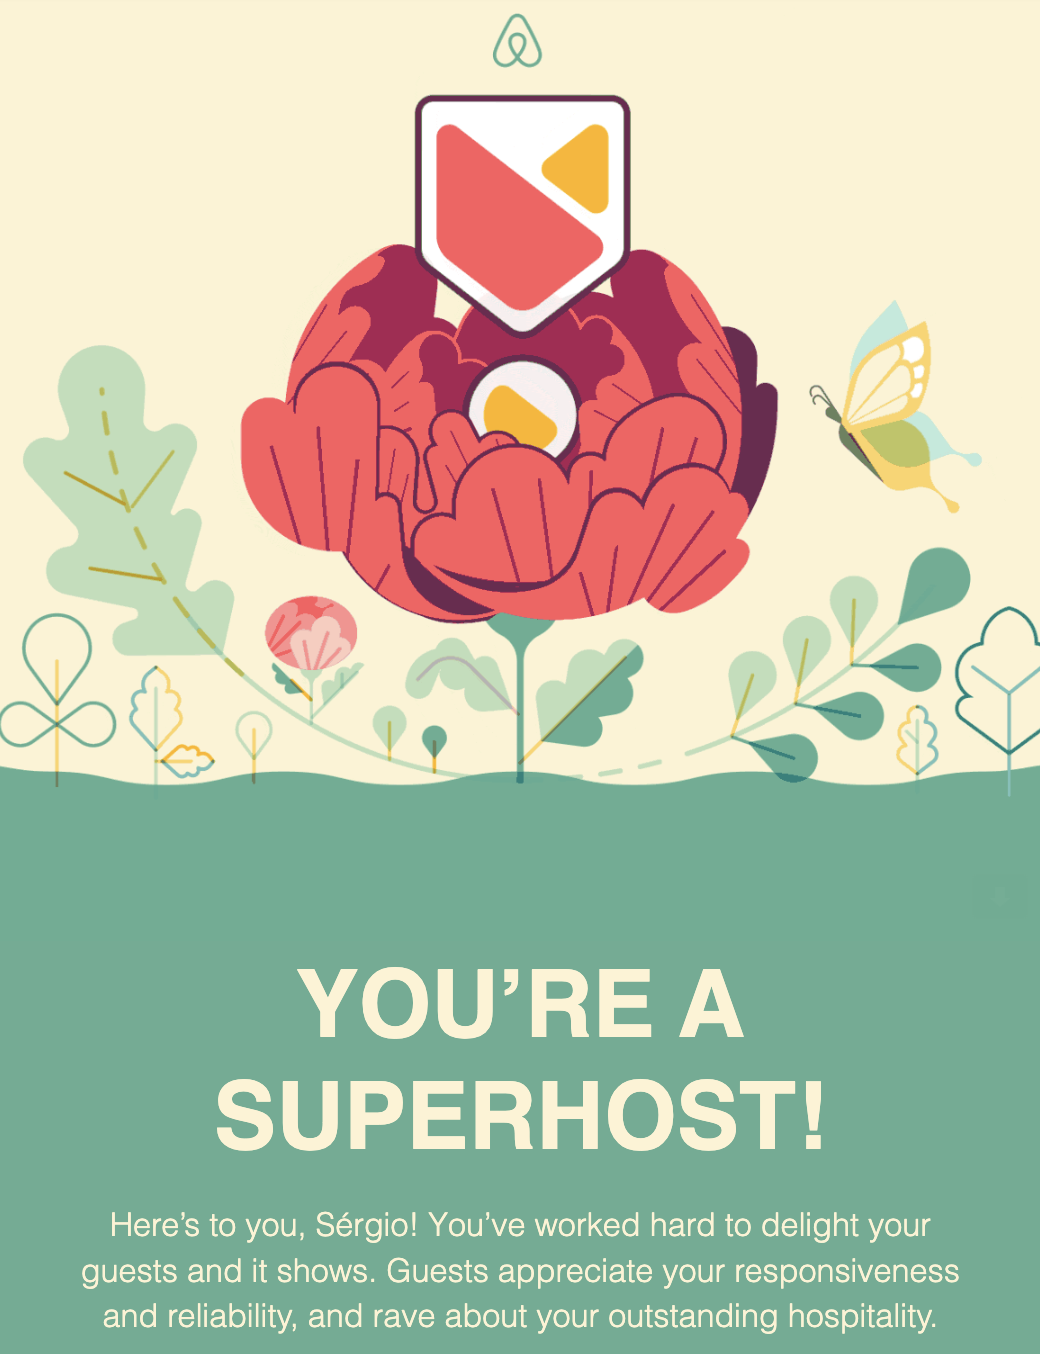 Super hosts achievement email from Airbnb.